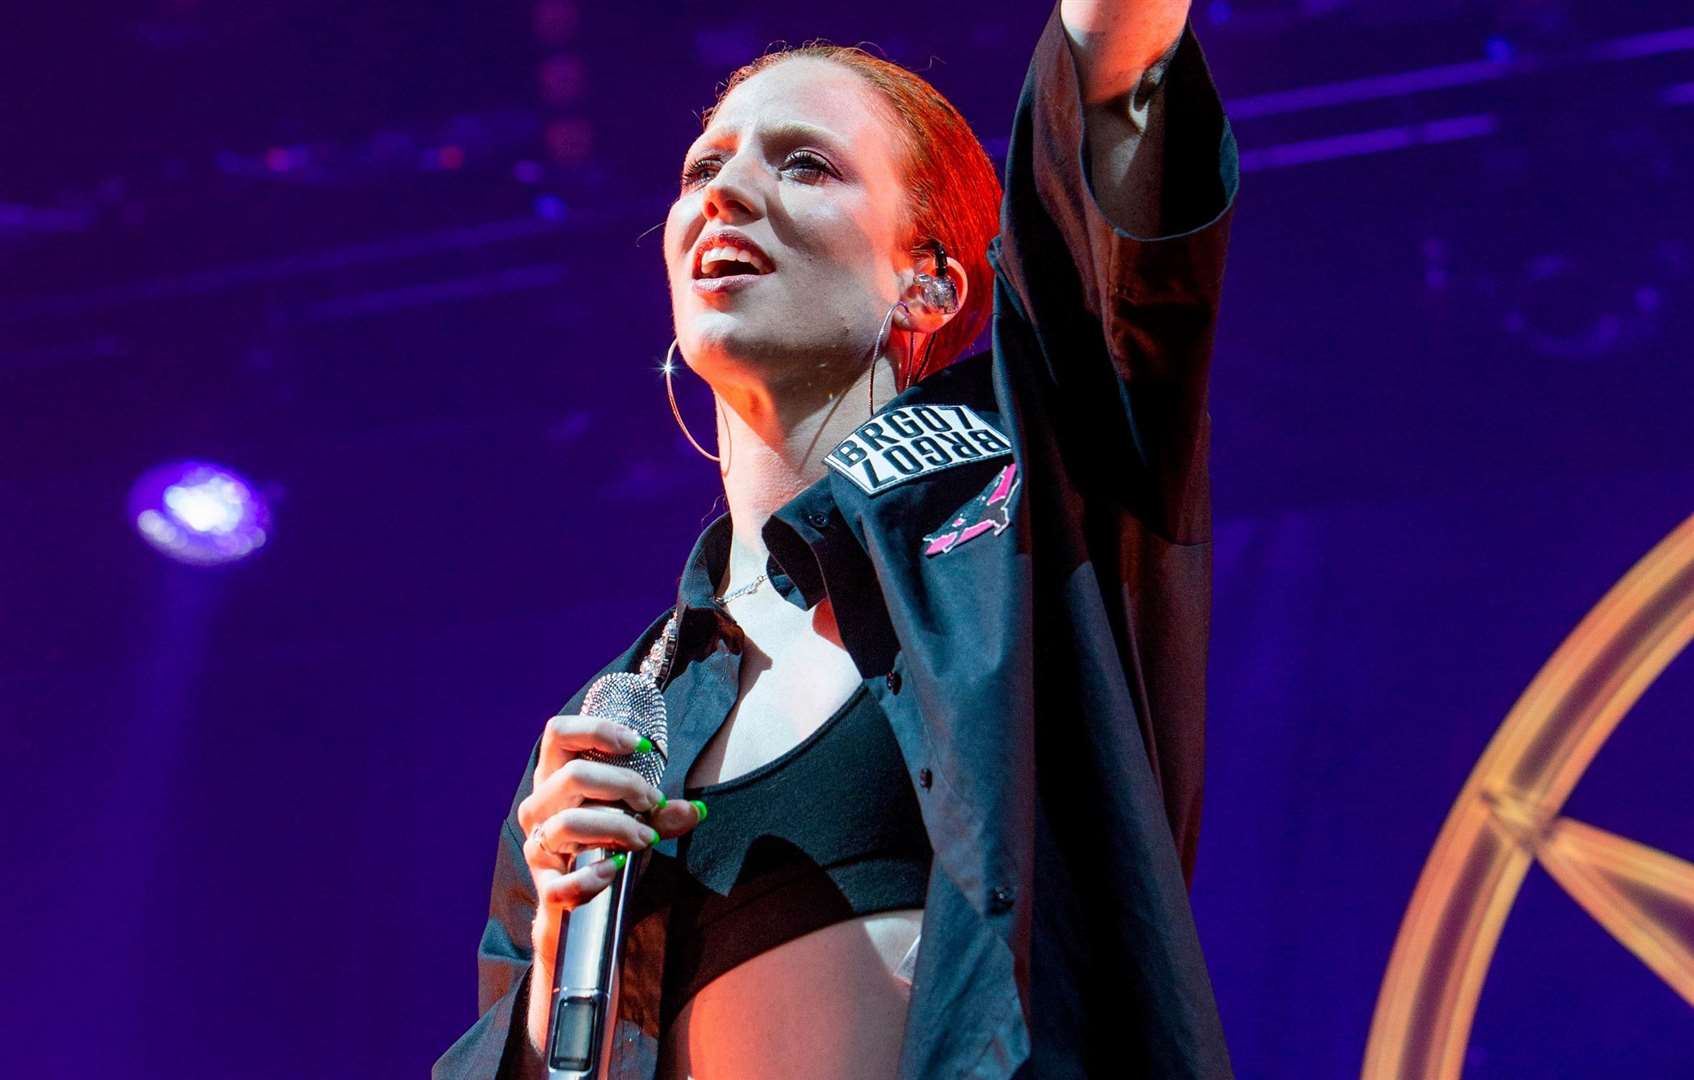 Jess Glynne will hit the venue’s scenic stage in July next year